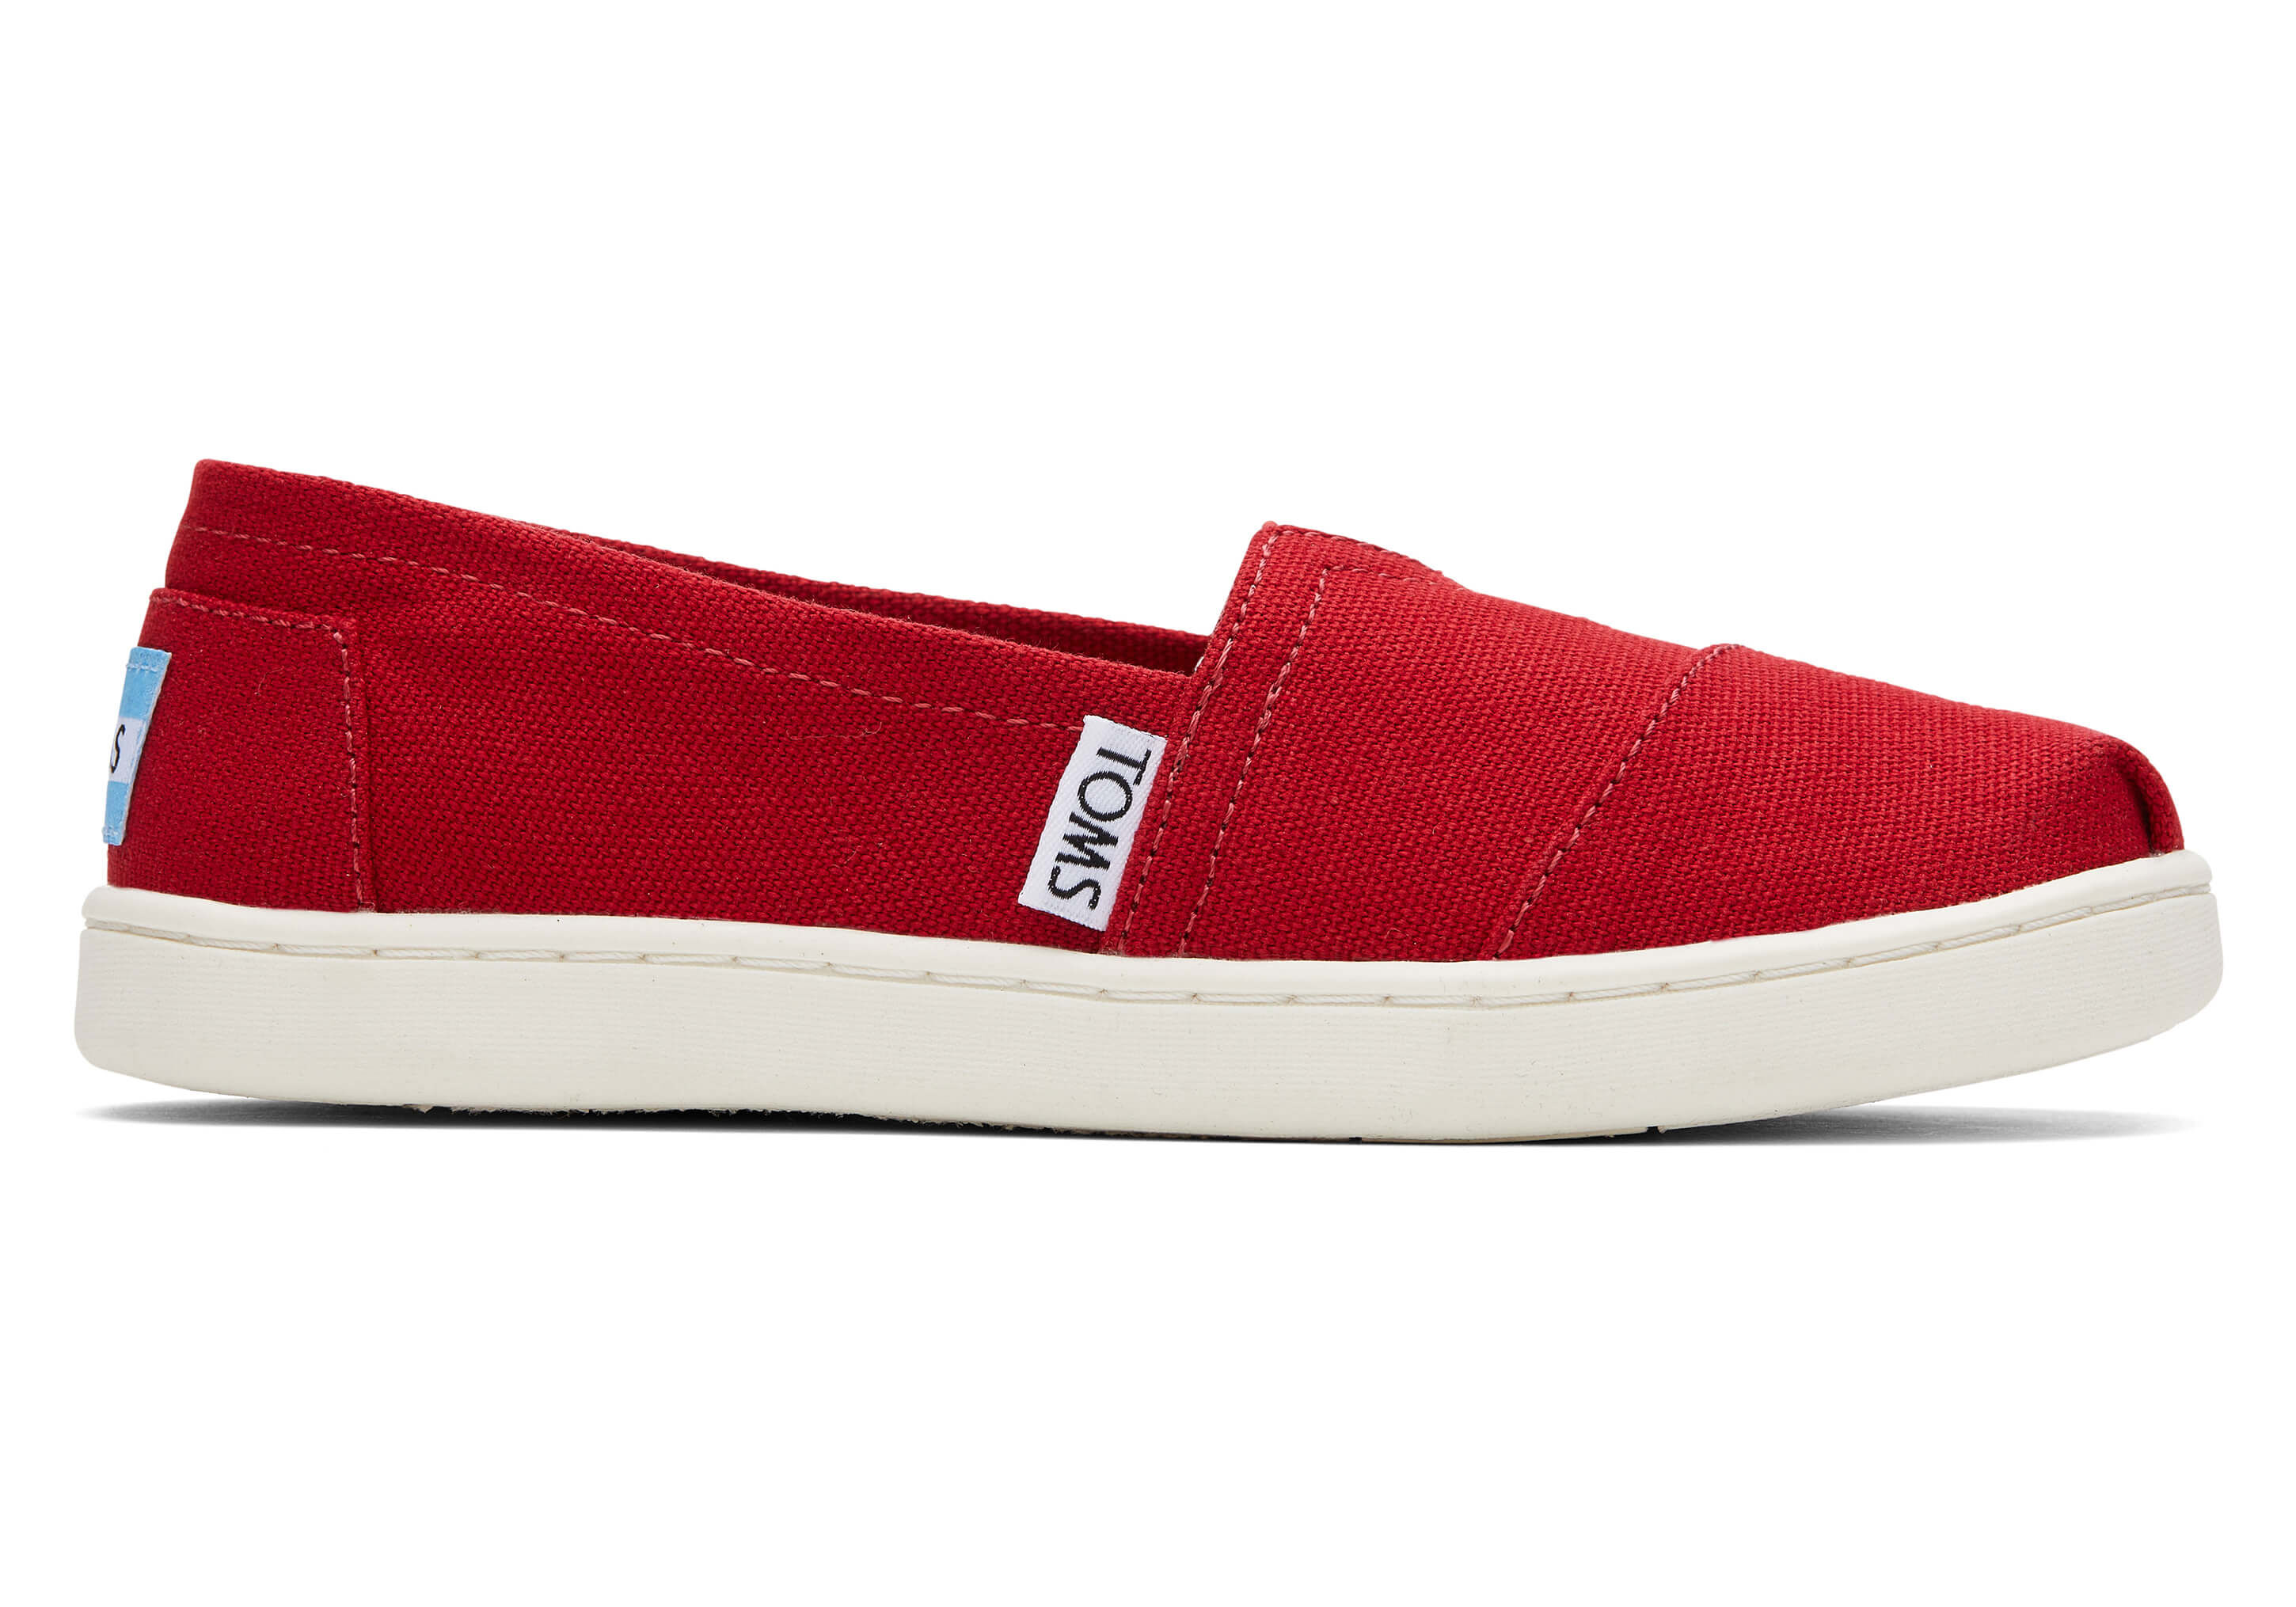 Victoria - Kids Canvas Velcro Sneaker in Carmin Red - Ponseti's Shoes